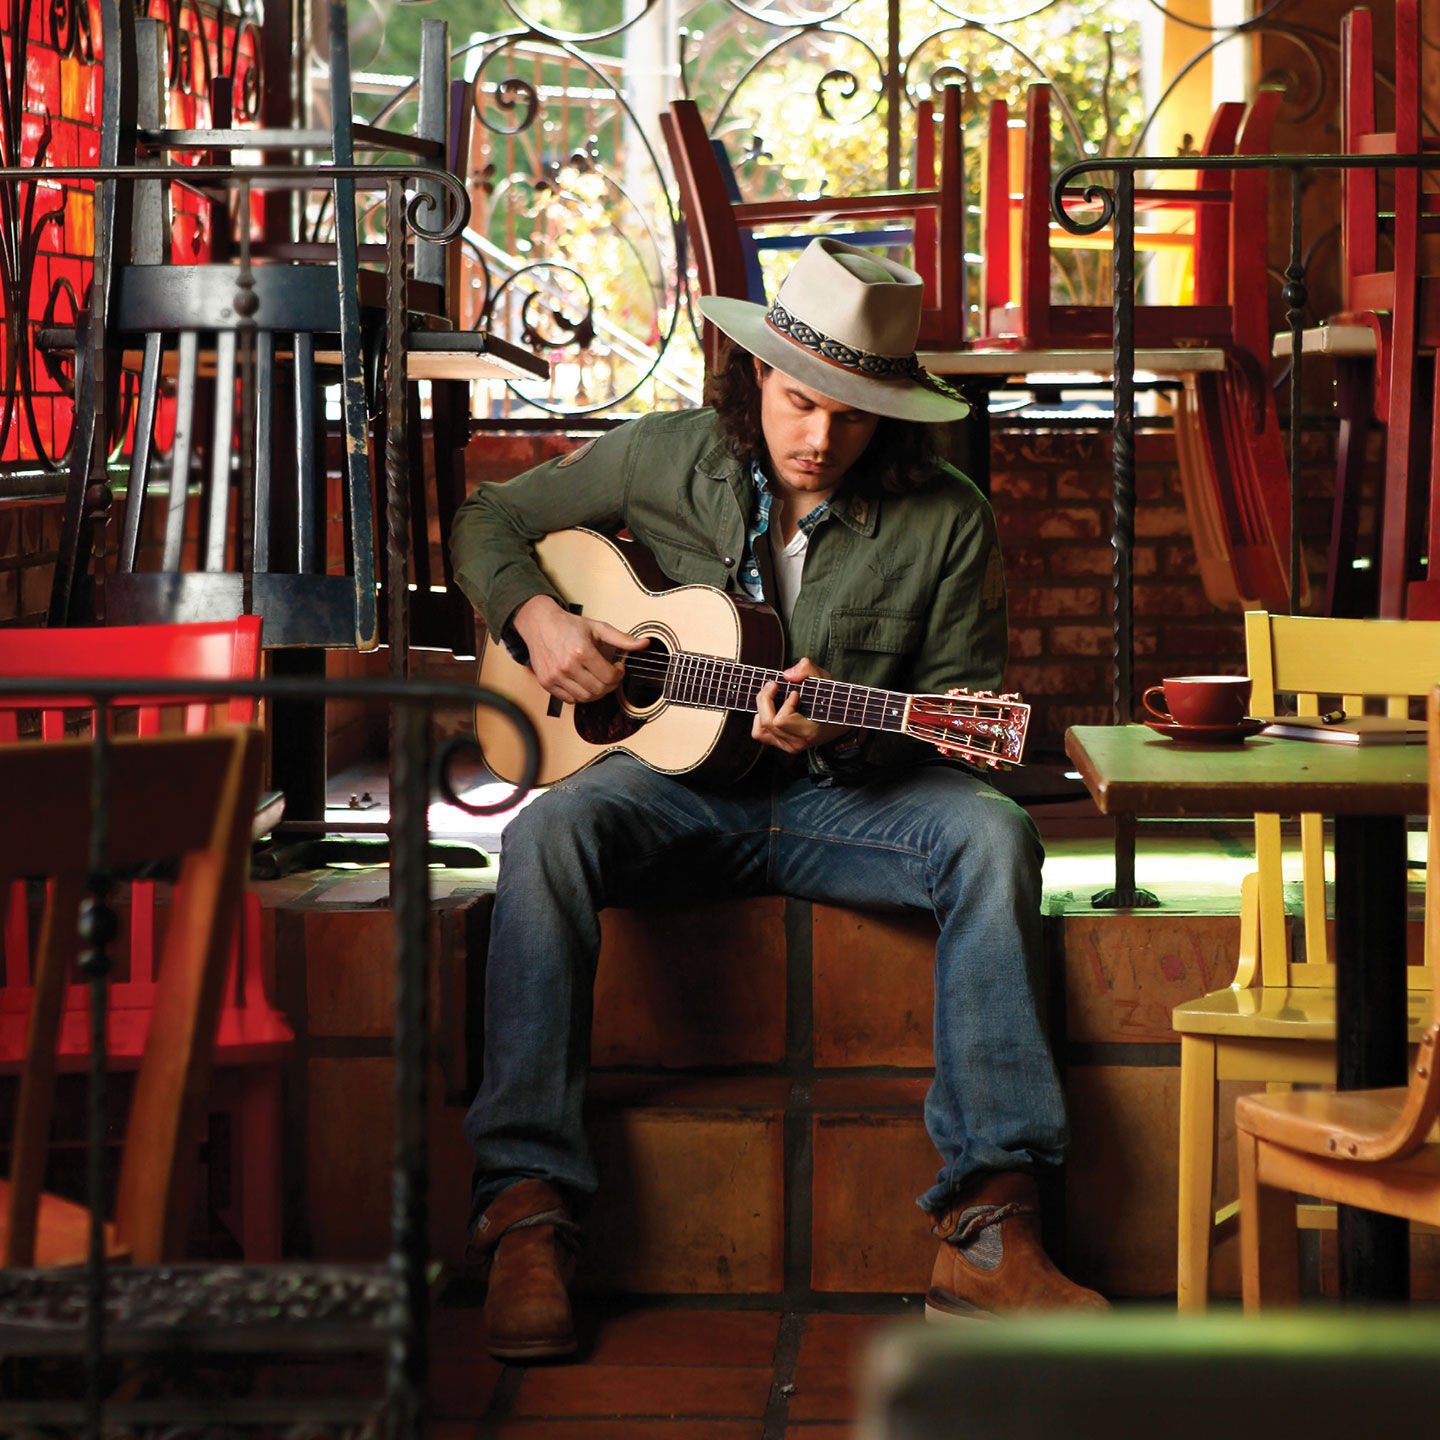 John Mayer wearing a brimmed hat and playing a Martin acoustic while sitting in a restaurant. Chairs are stacked on top of the table.